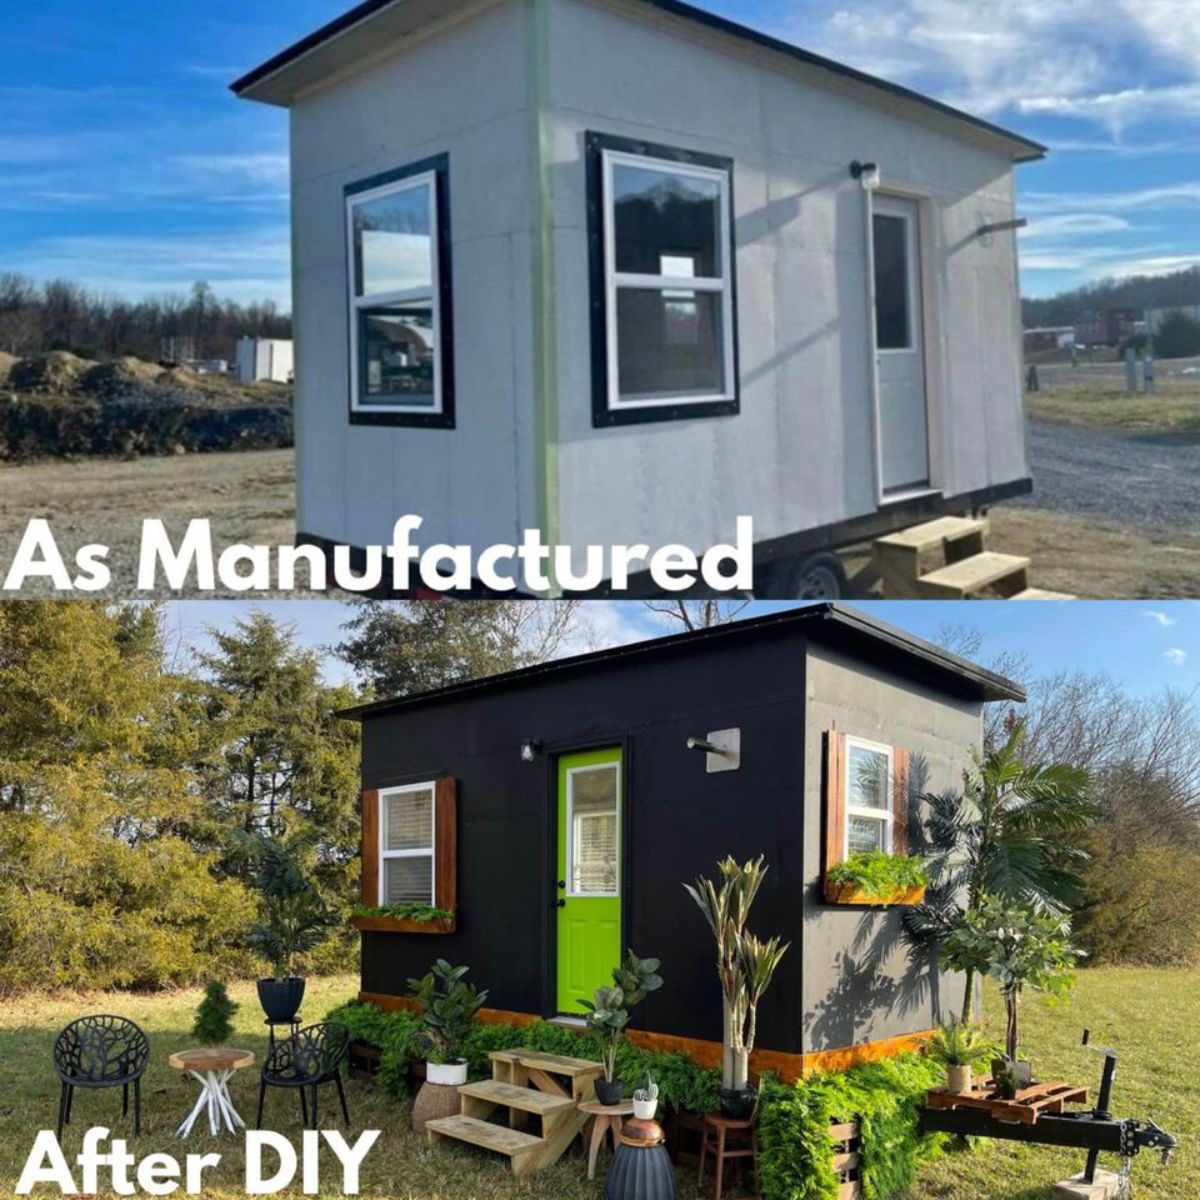 Comparative images of 16’ Turnkey Ready Tiny House before DIY and After DIY